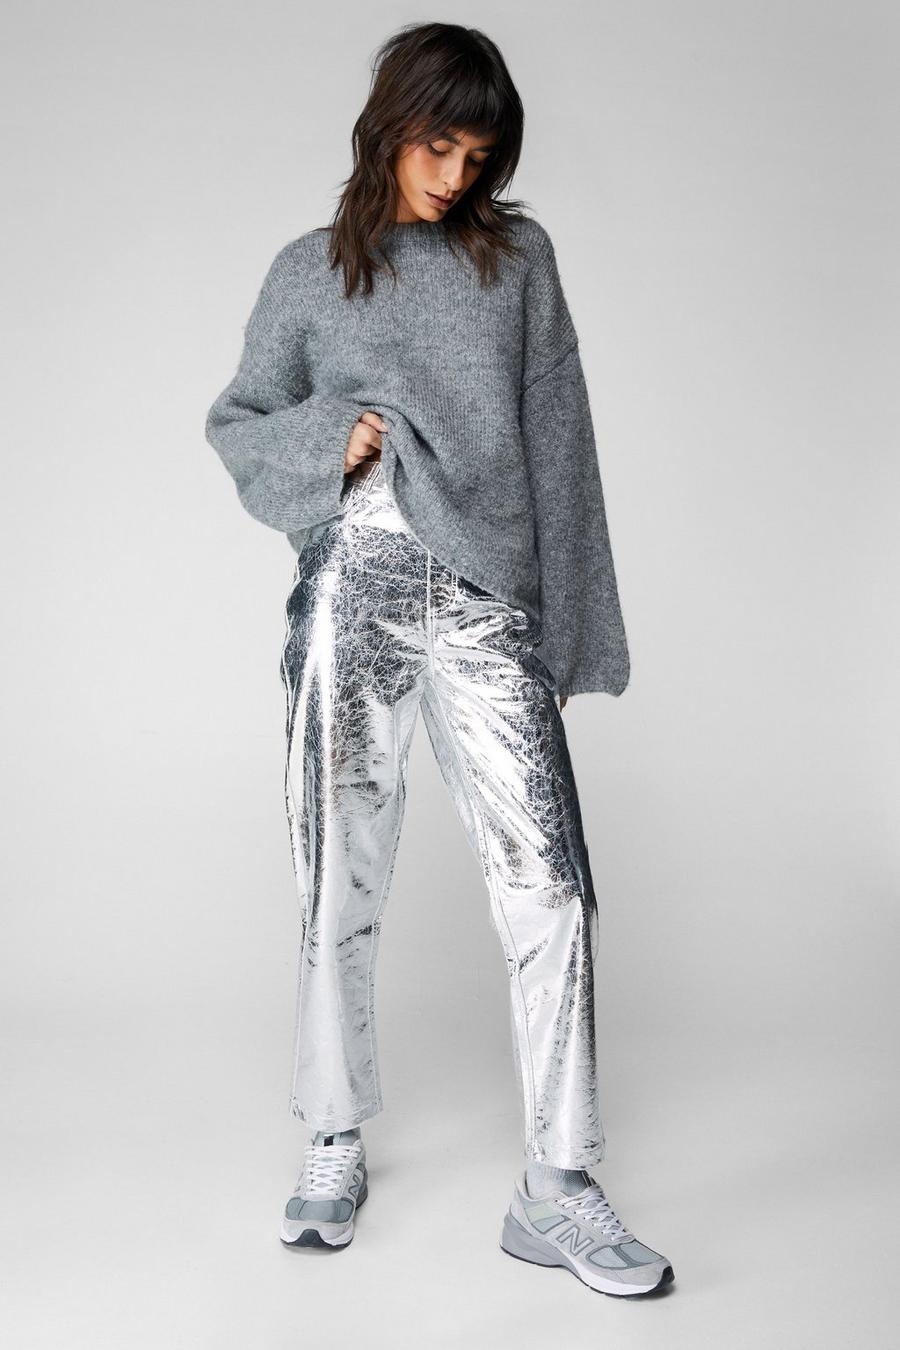 Silver Metallic Crackle Faux Leather Trousers